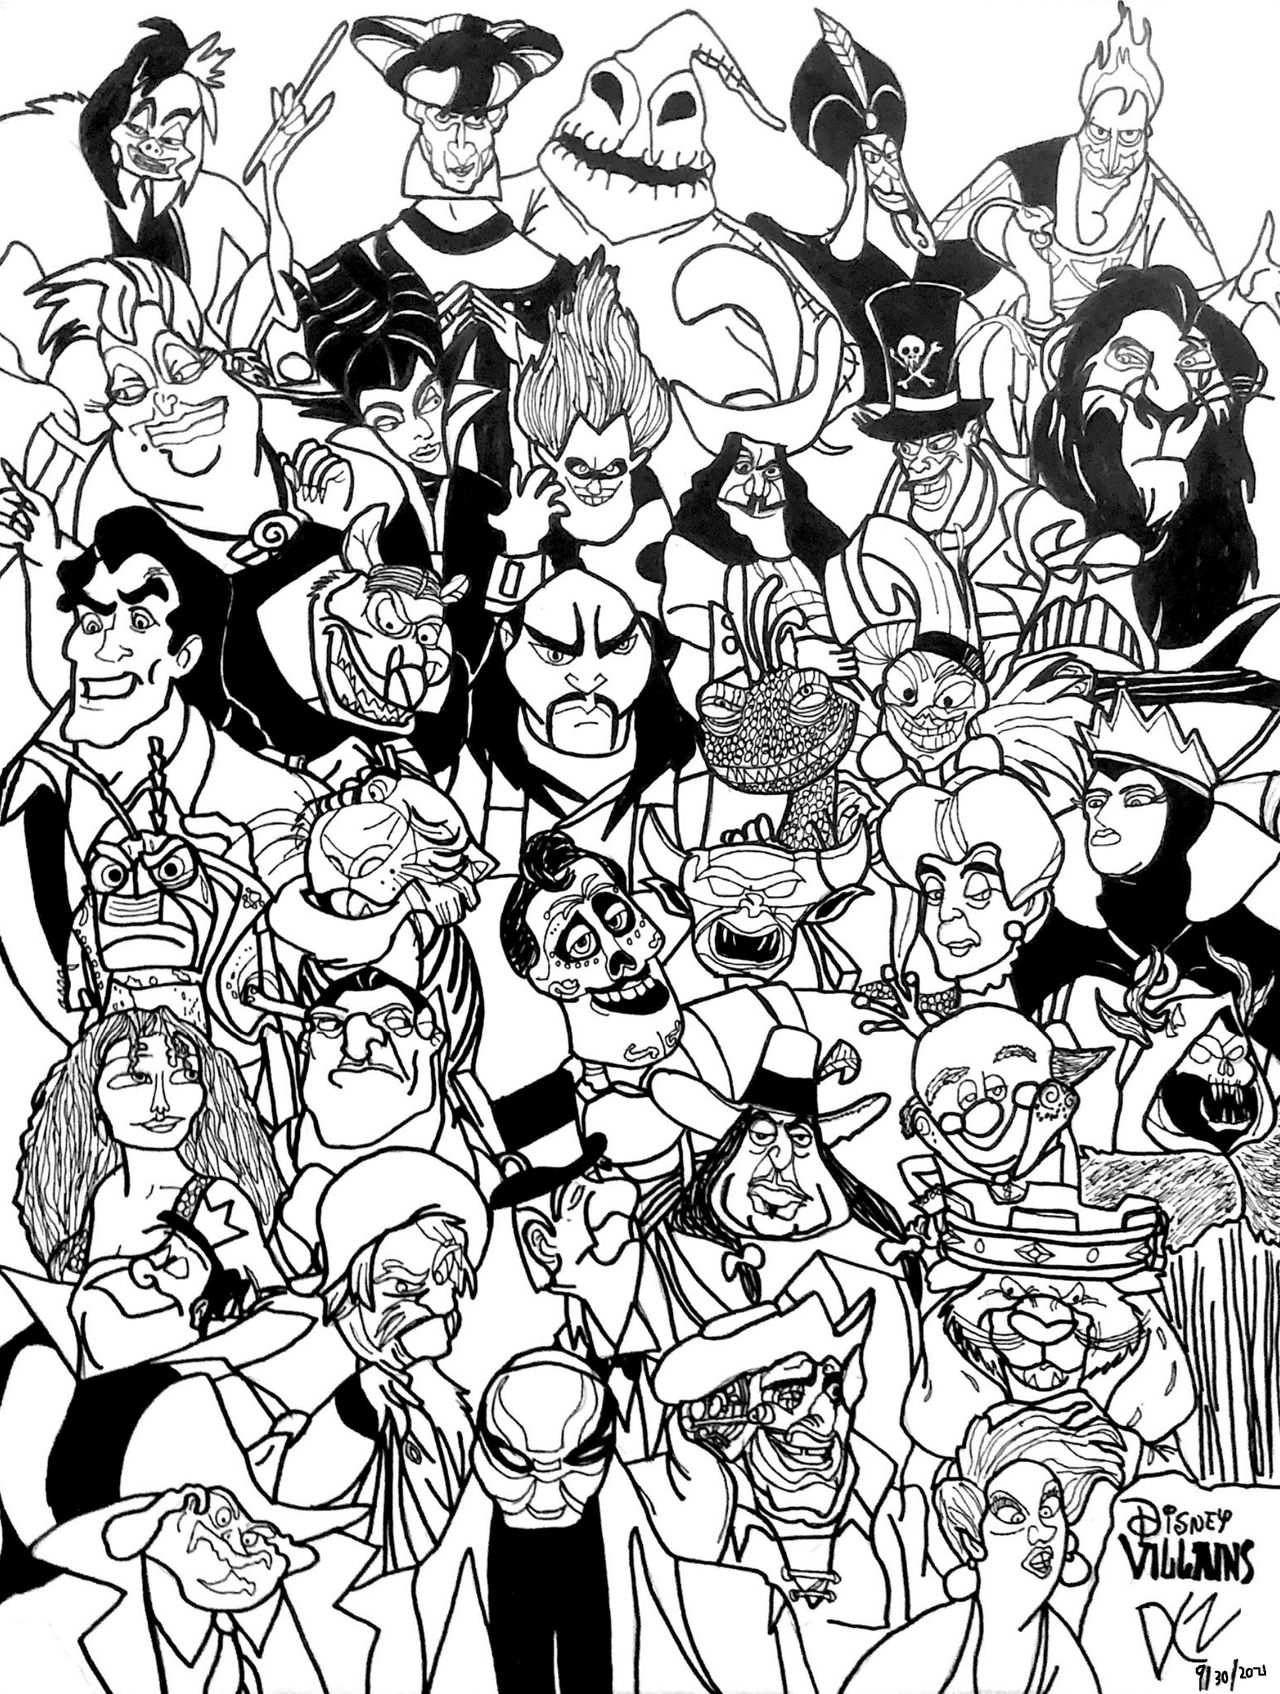 Disney villians character collage by dcz